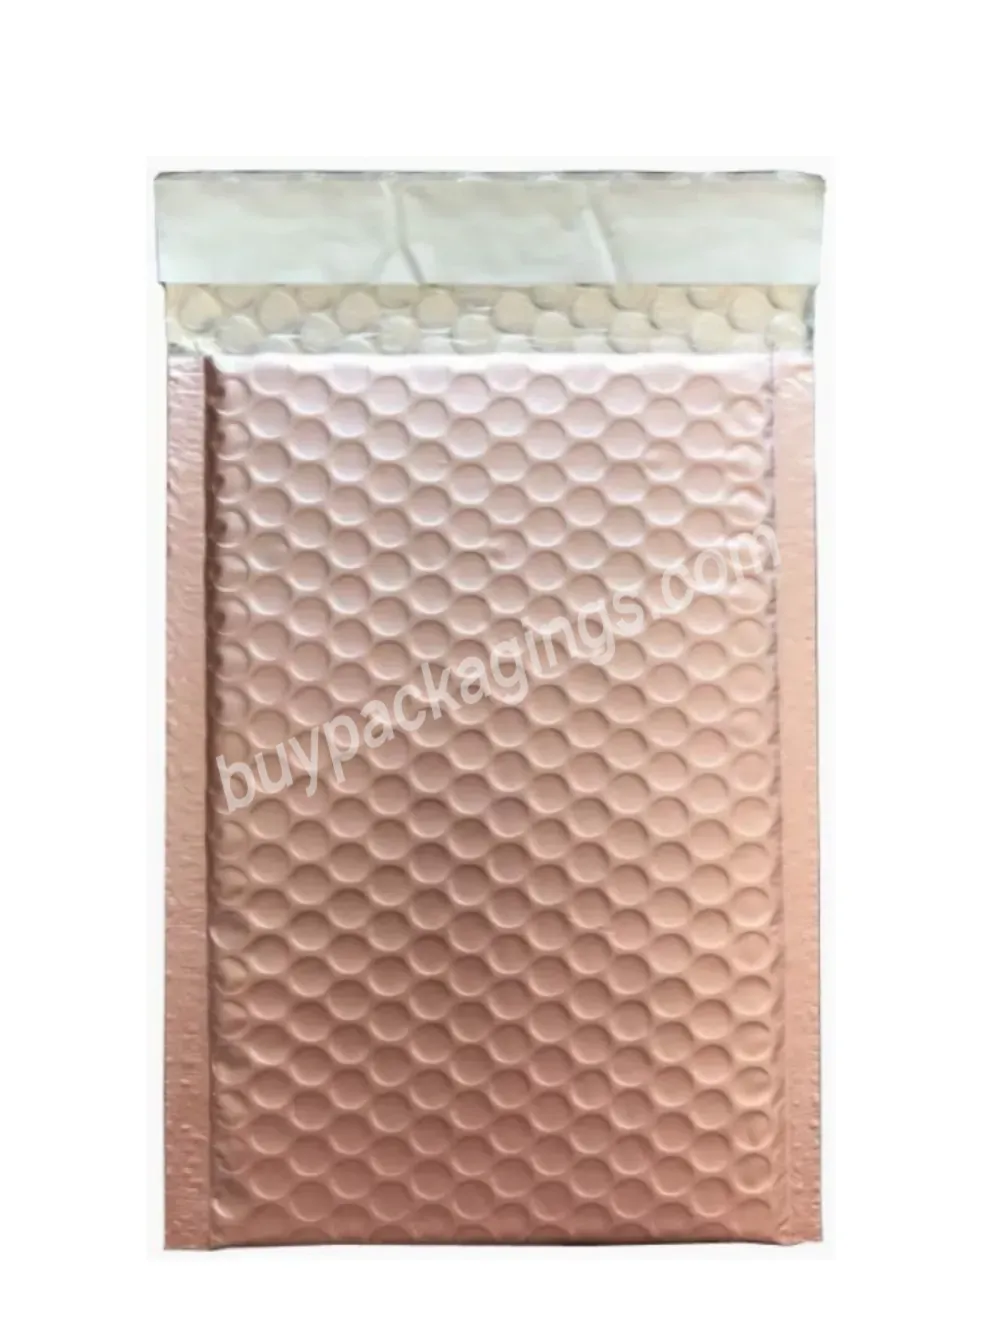 Ctcx Print Polymailers Shipping Metallic Holographic Padded Bubble Mailers Courier Packaging Delivery Bags Metallic Gift Bag - Buy Metallic Bags Metallic Bubble Mailer Metallic Gift Bag Metallic Envelope Pink Envelops Metallic Metallic Gold Bubble Ma